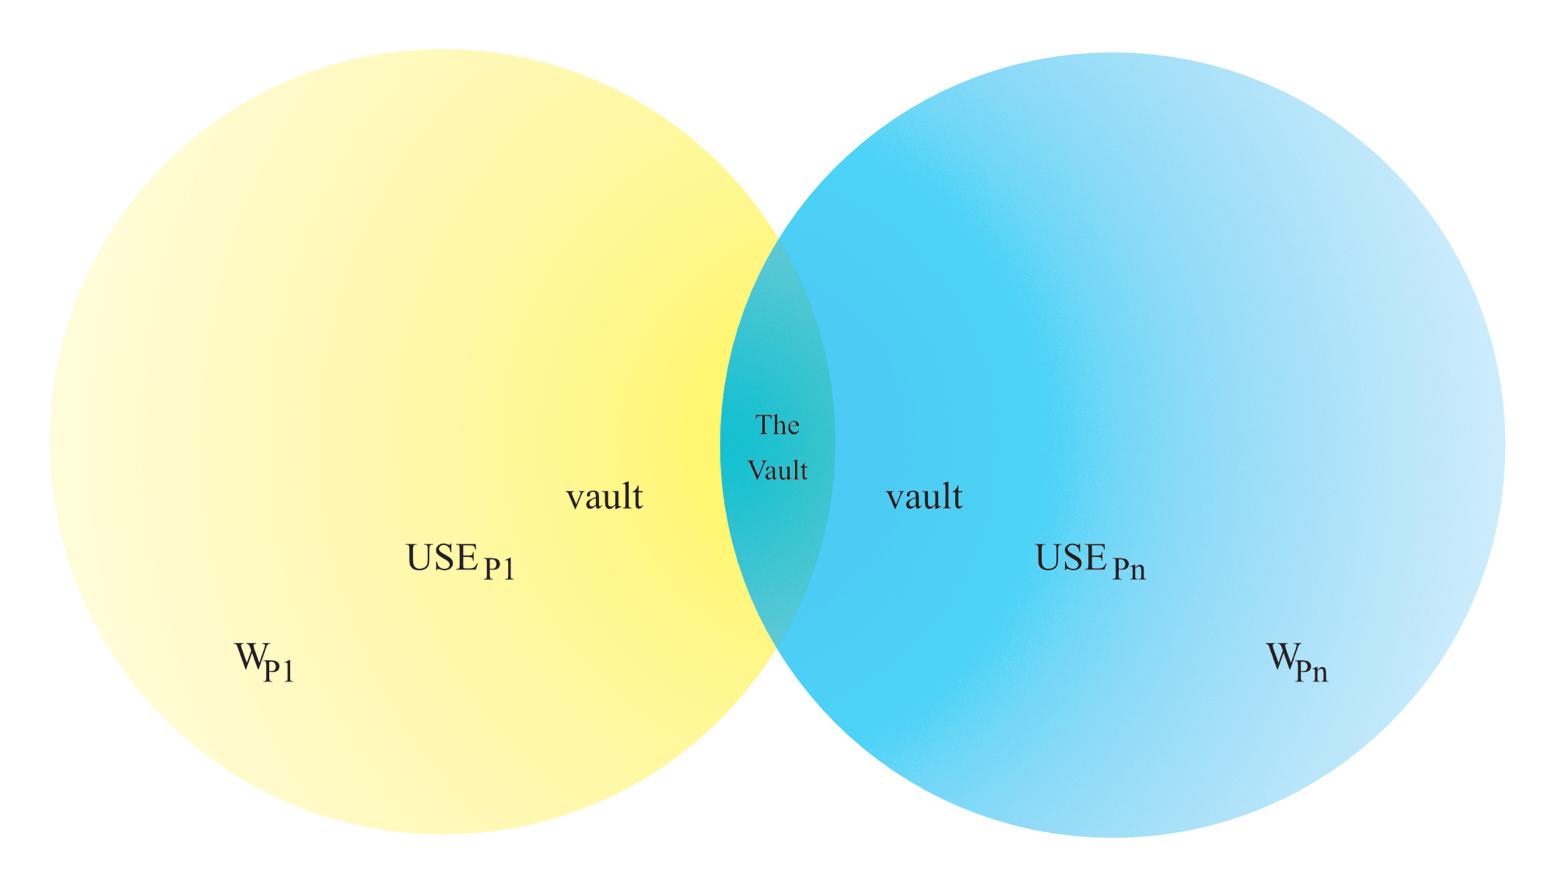 This is a Venn diagram of the intersection between people’s experience of the world. On the left, a pale yellow circle darkens in gradation from left to right. On the right, a pale blue circle darkens right to left. Their intersection (in their darker portions) is a green area identified as The Vault. The following labels appear in each circle at increasing distances from that central intersection: vault, USE sub P sub n, and W sub P sub n.